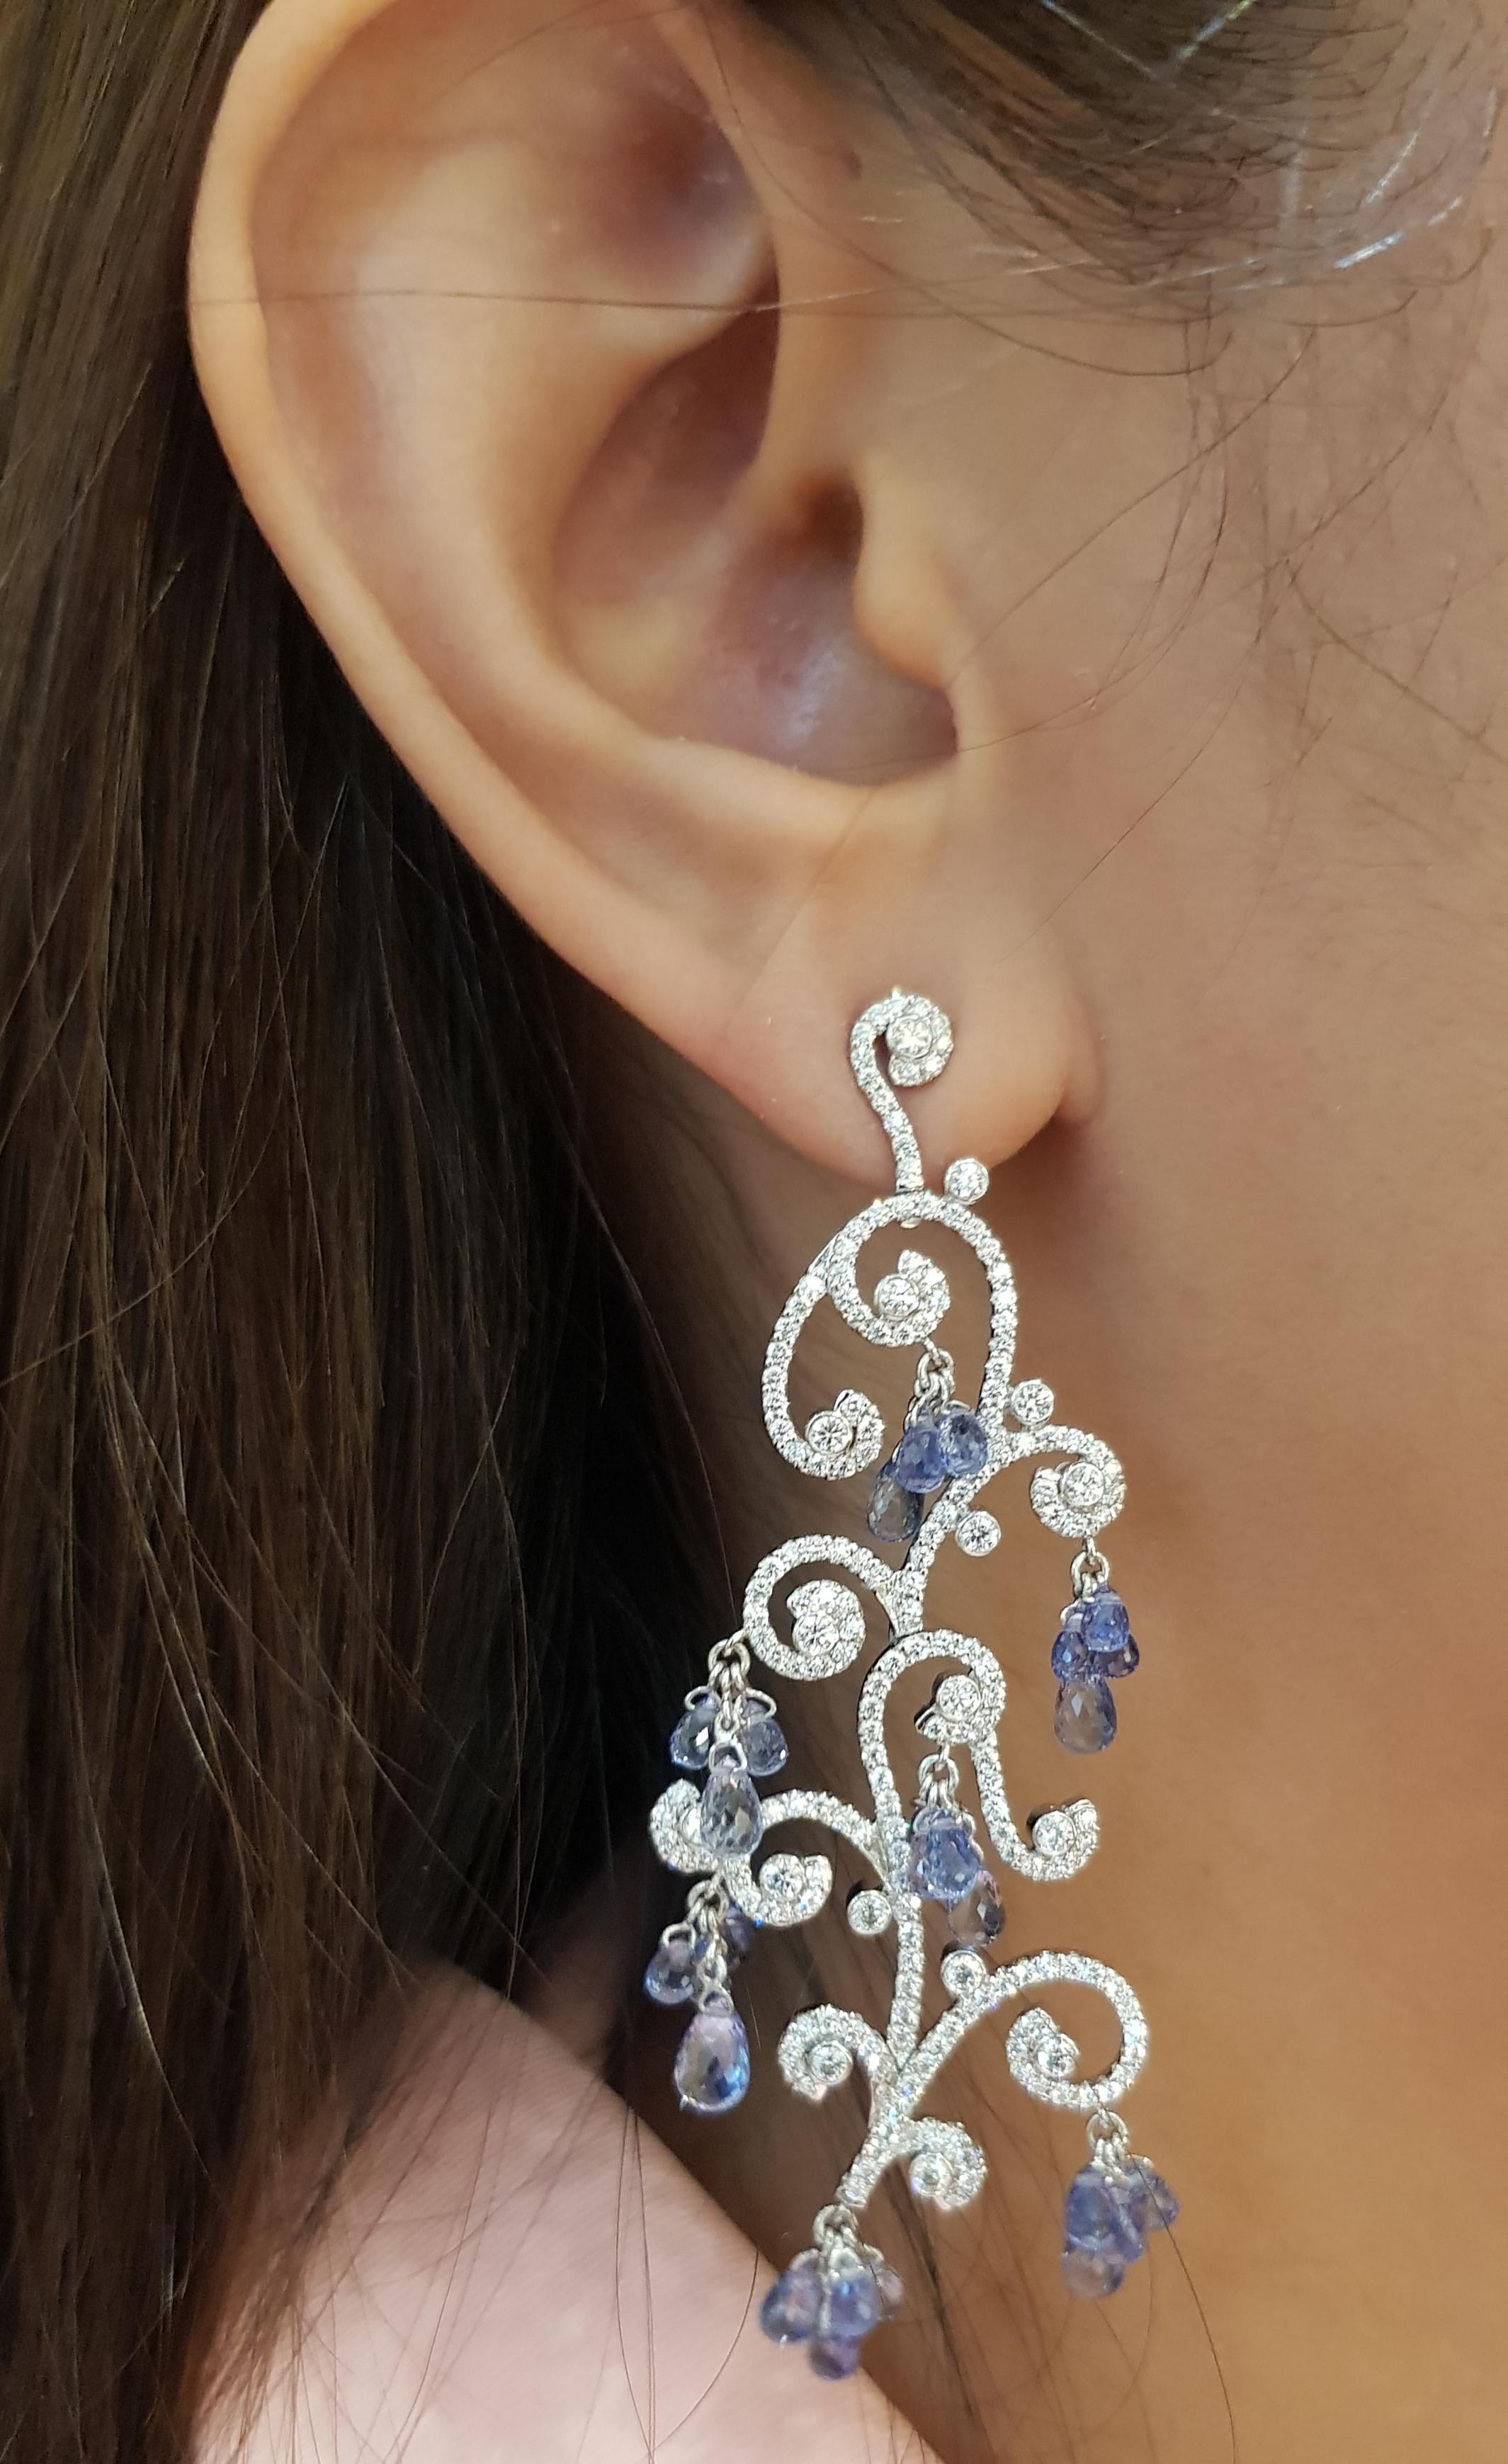 Blue Sapphire 16.71 carats with Diamond 3.13 carats Earrings set in 18 Karat White Gold Settings

Width:  2.5 cm 
Length:  6.8 cm
Total Weight: 19.78 grams

